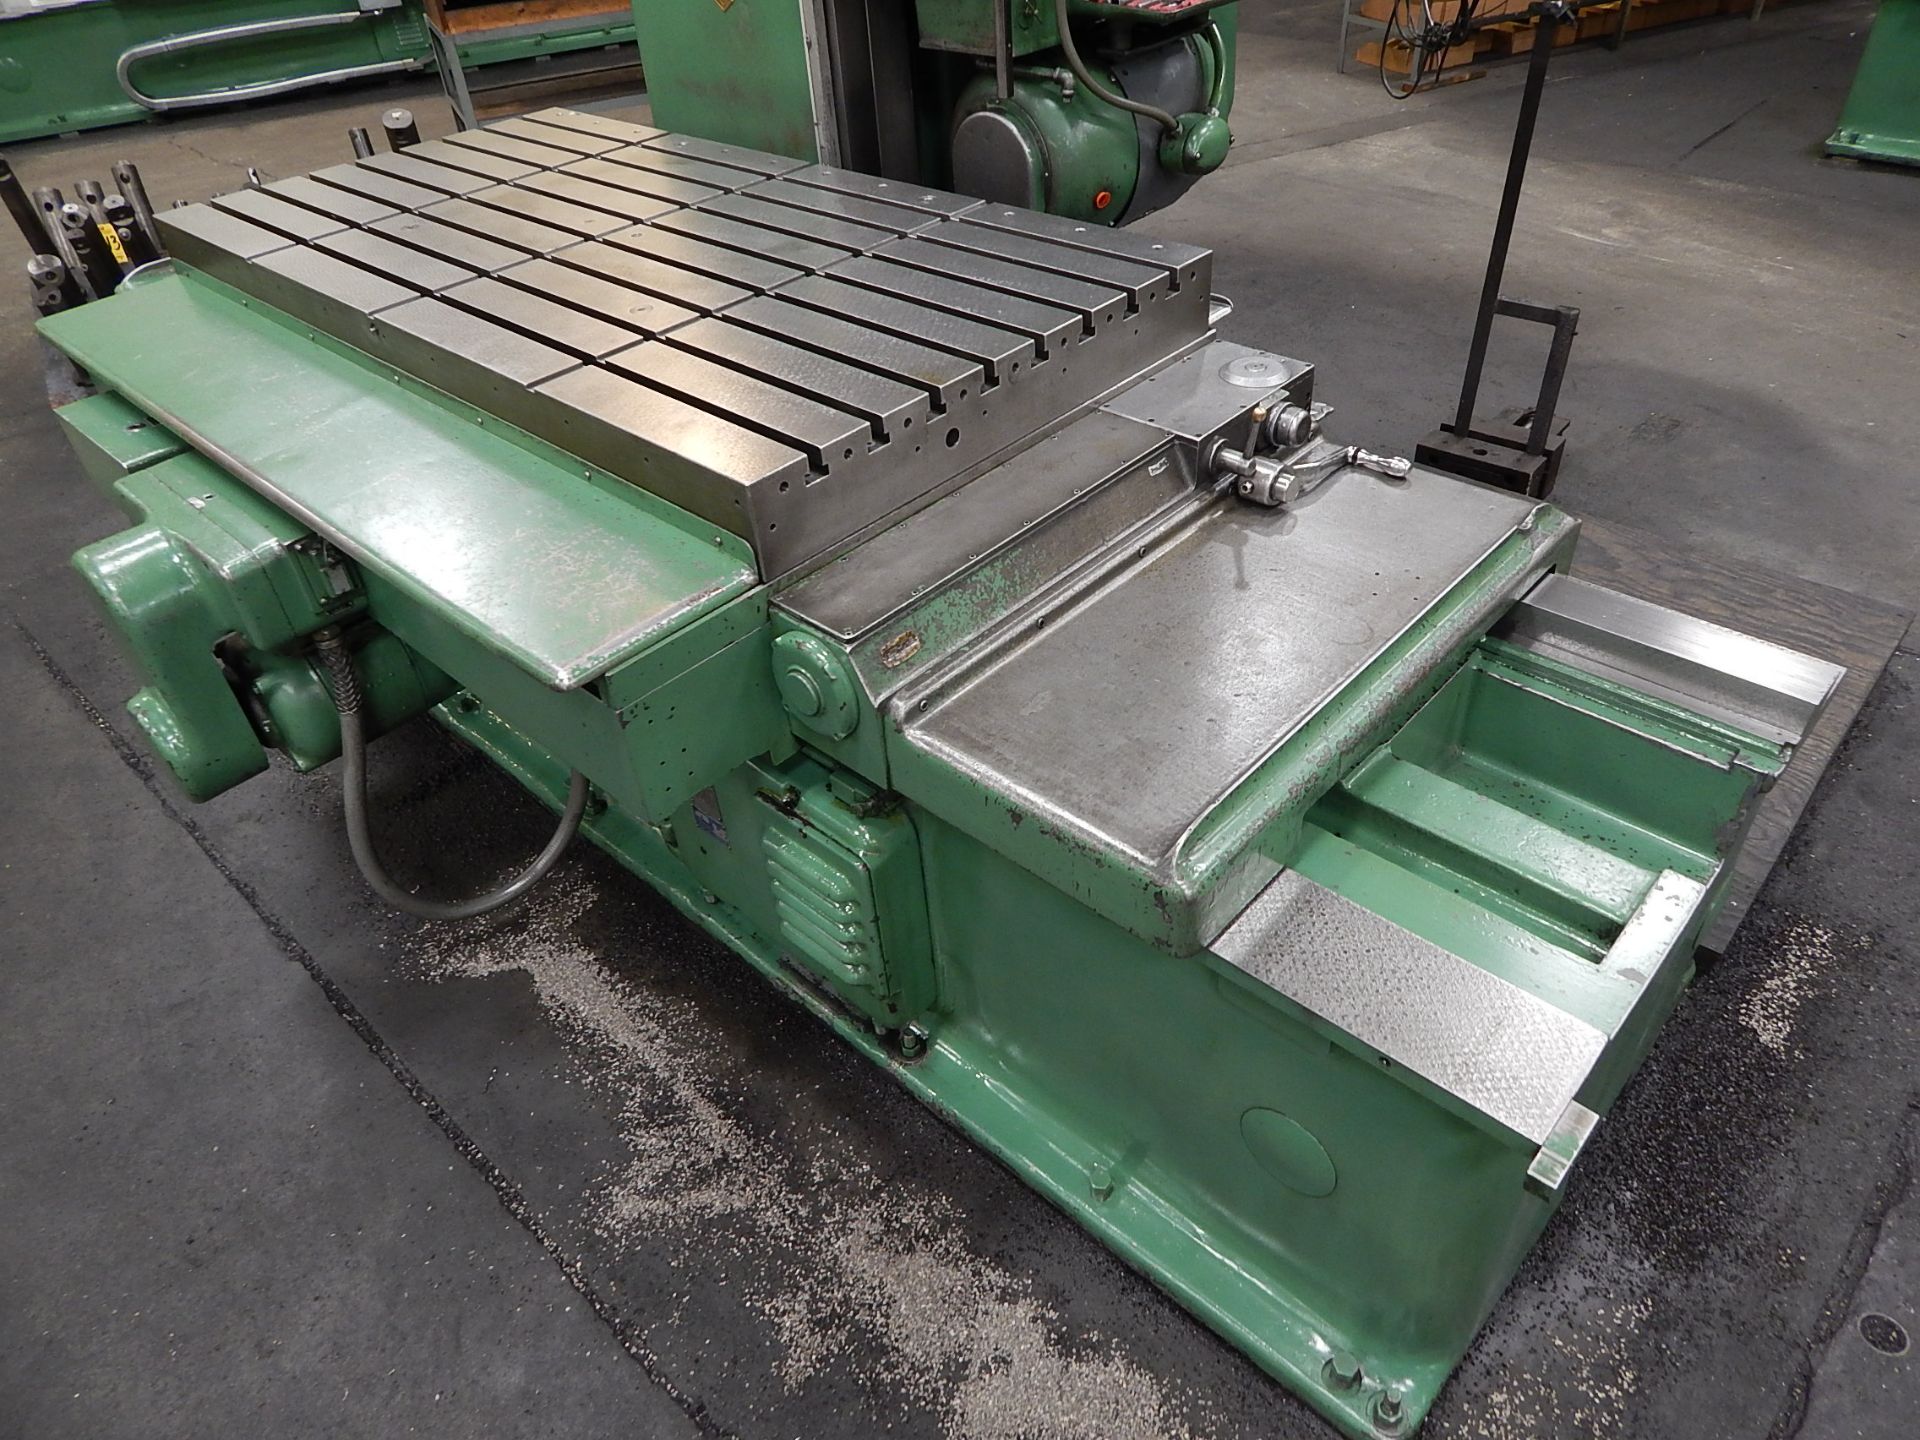 Devlieg 4B-72 Spiramatic Jig Mill, s/n 11-231, 4 In. Spindle, 50 Taper, Power Drawer Bar, 40 In. X - Image 3 of 19